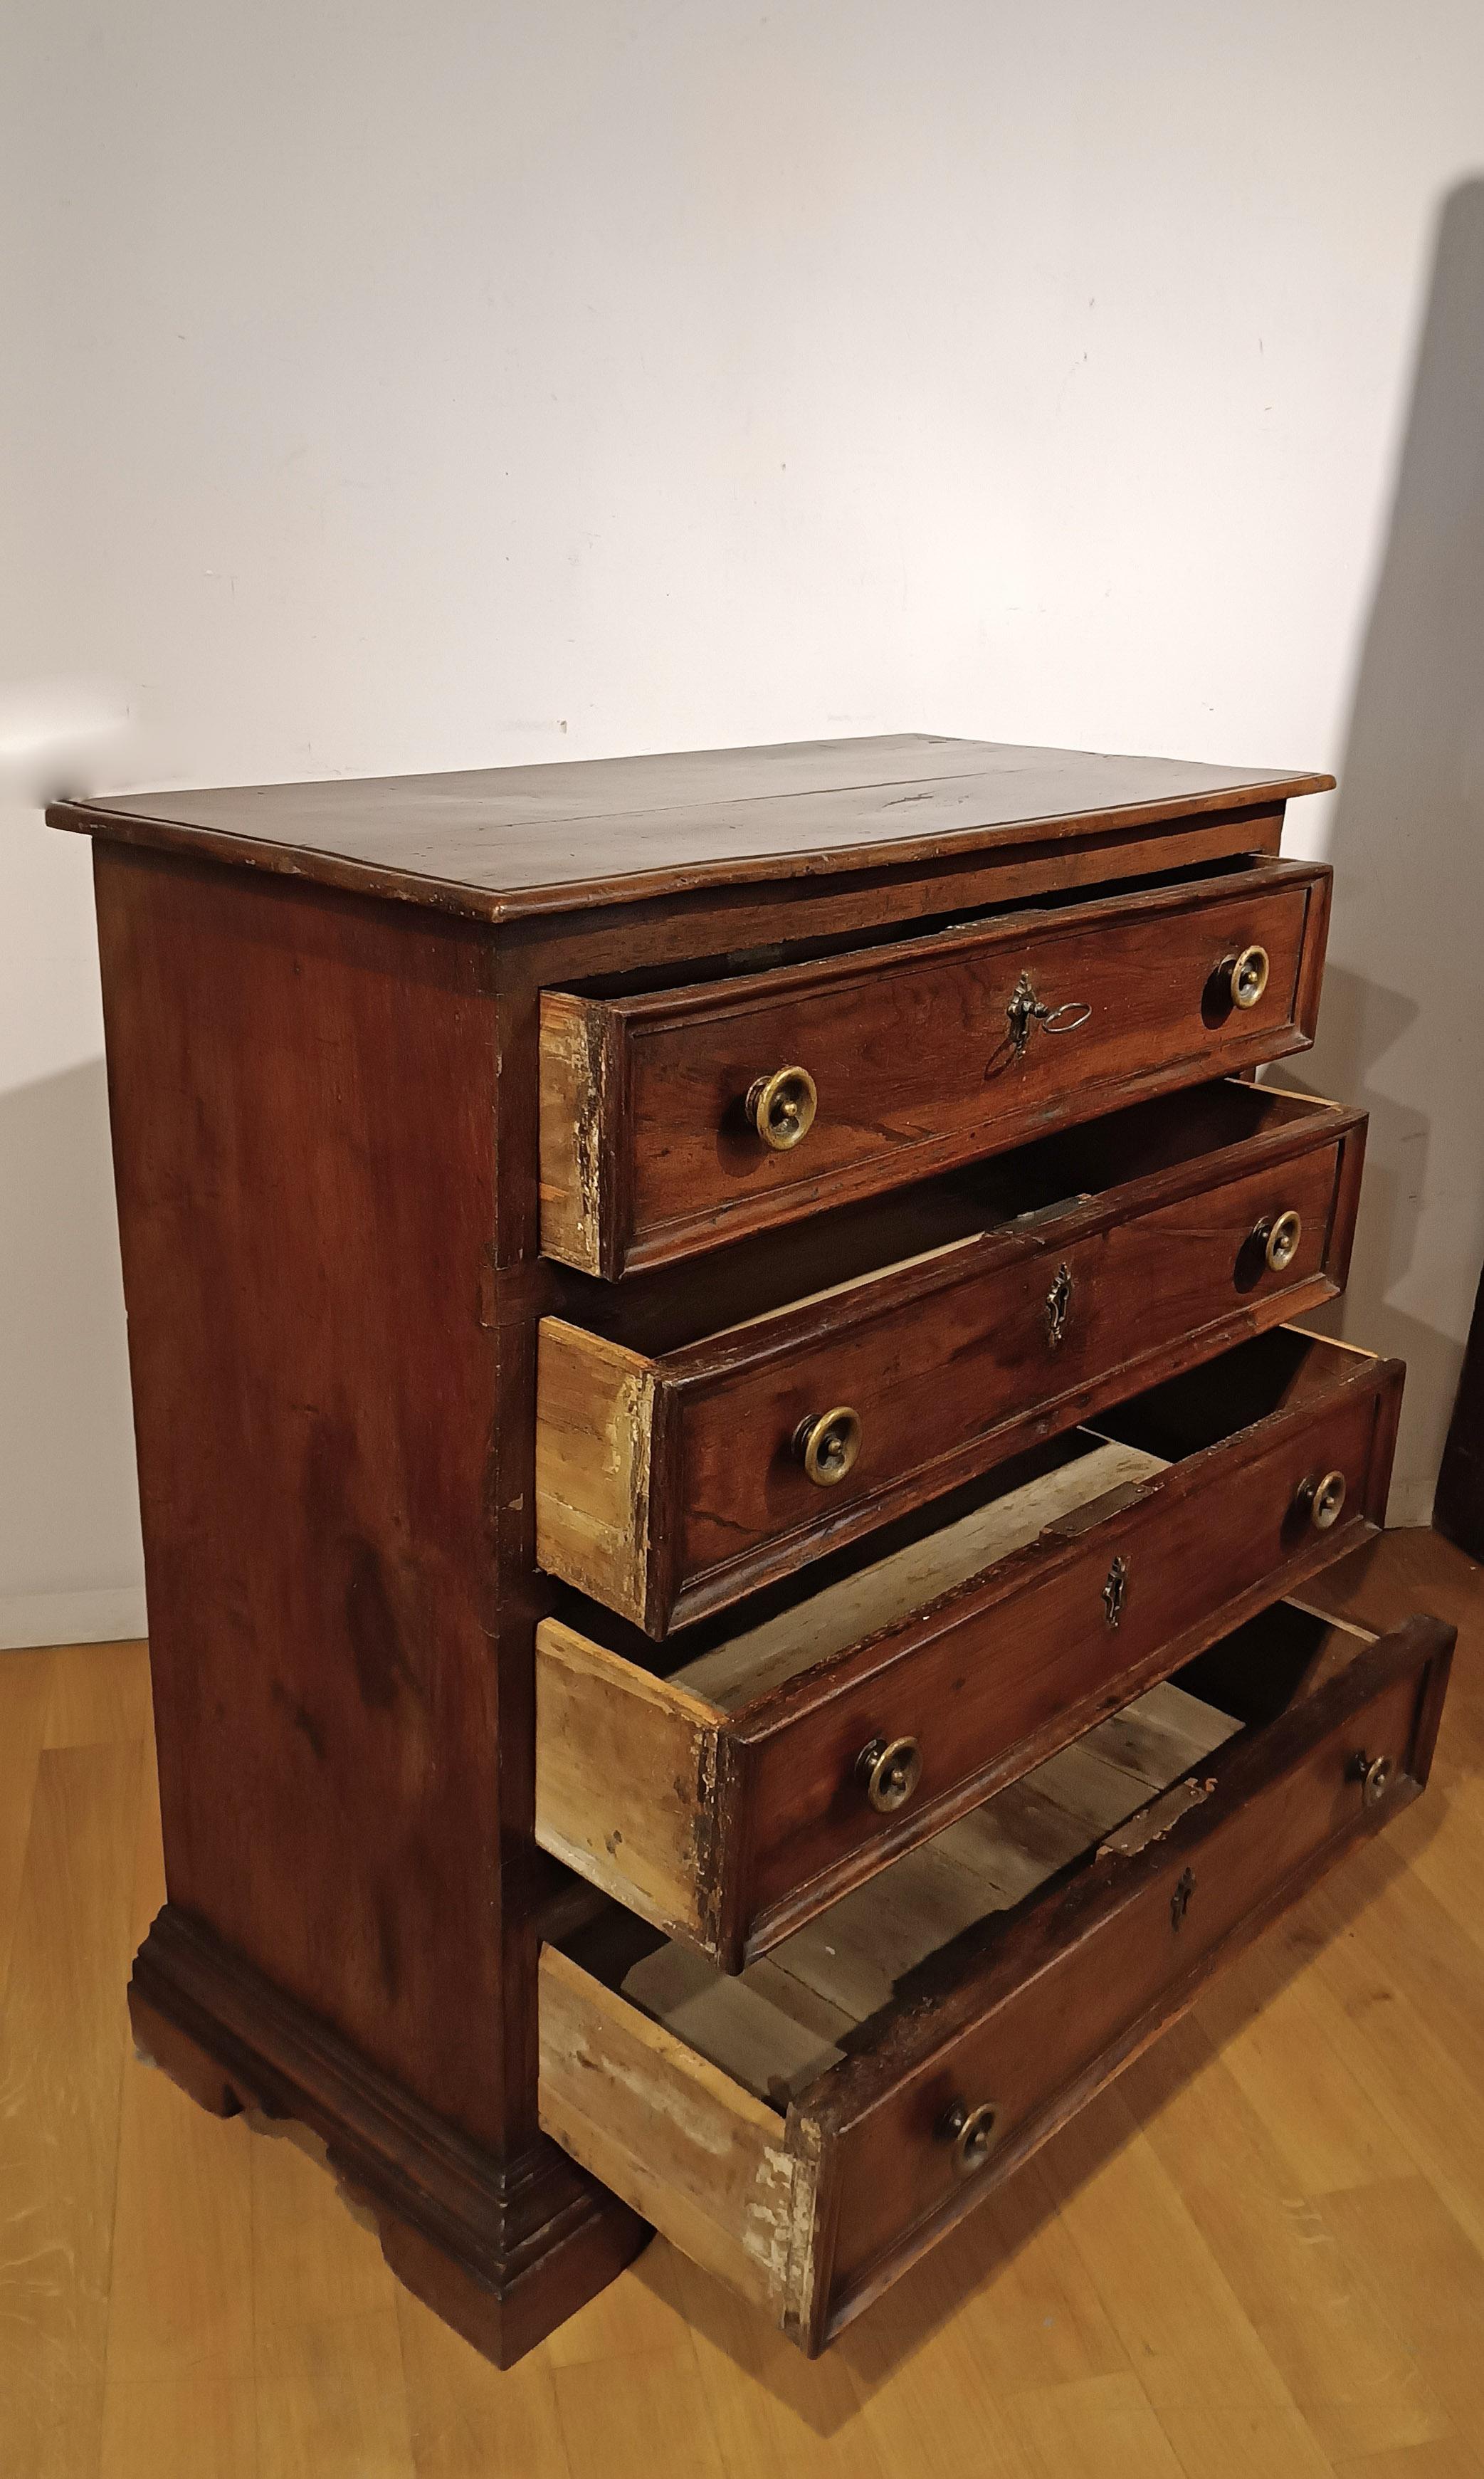 17th CENTURY CHEST OF DRAWERS IN SOLID AND VENEREED WALNUT 4